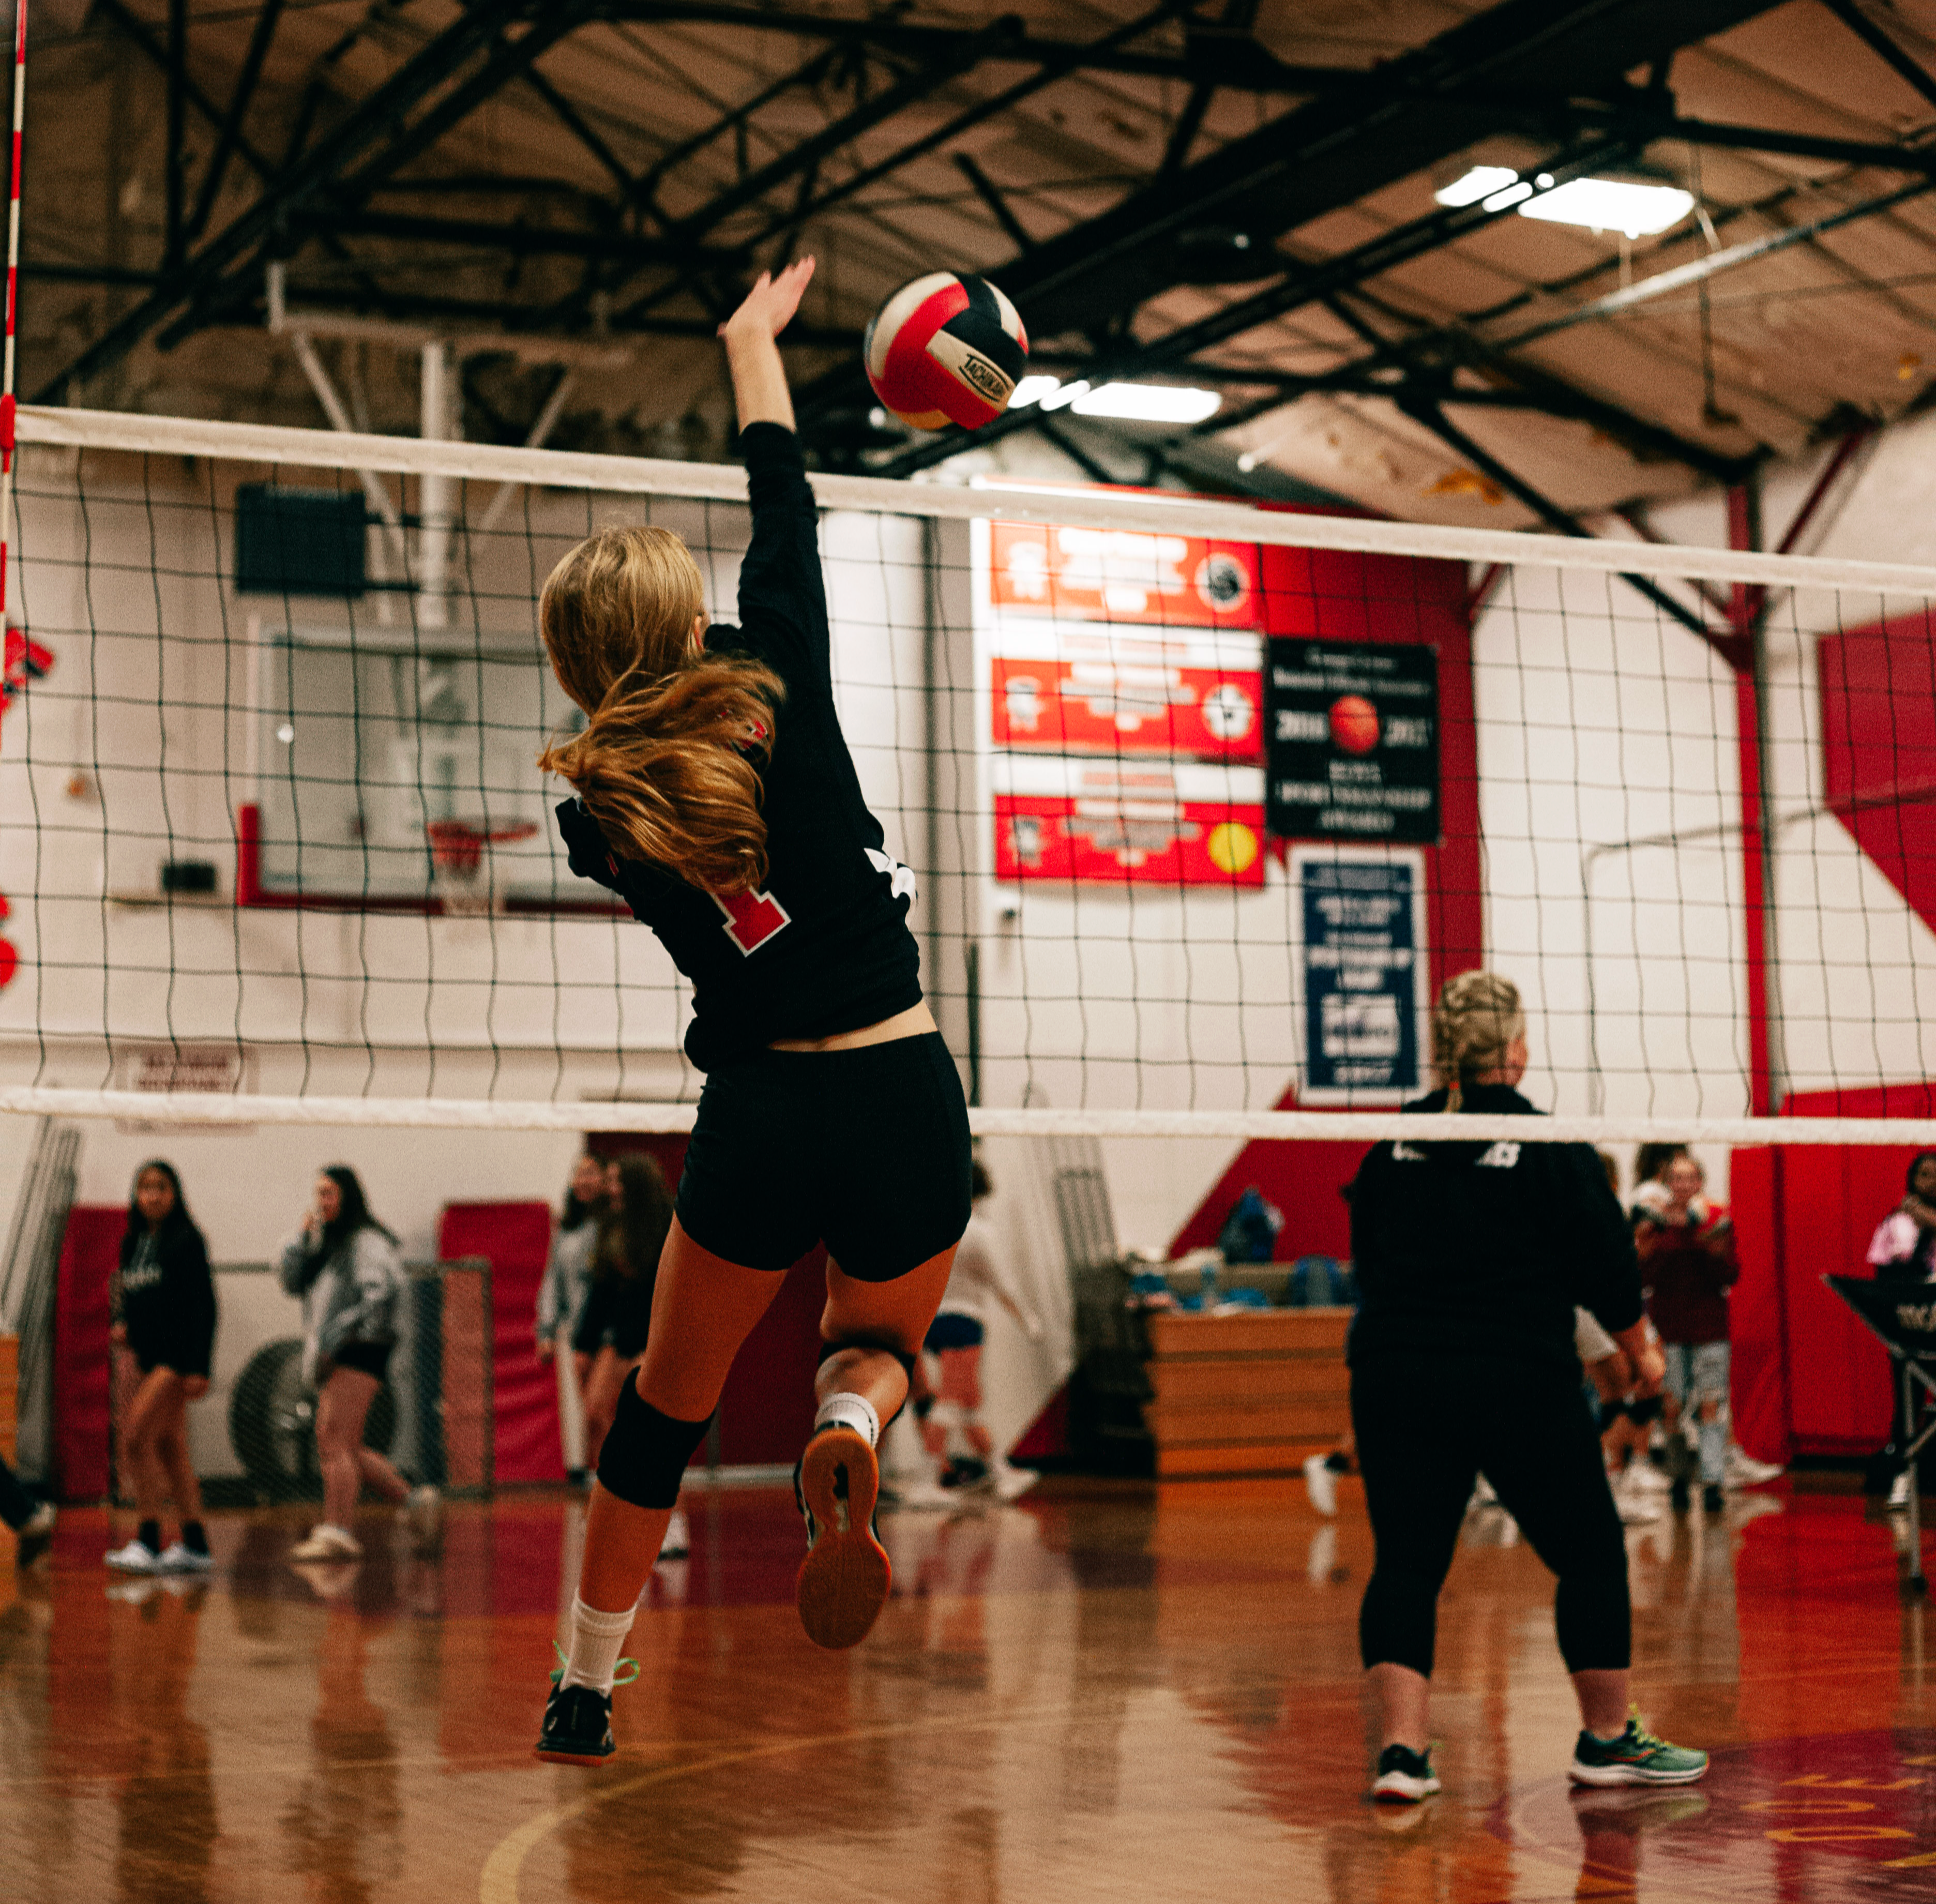 Volleyball player hitting ball over the net